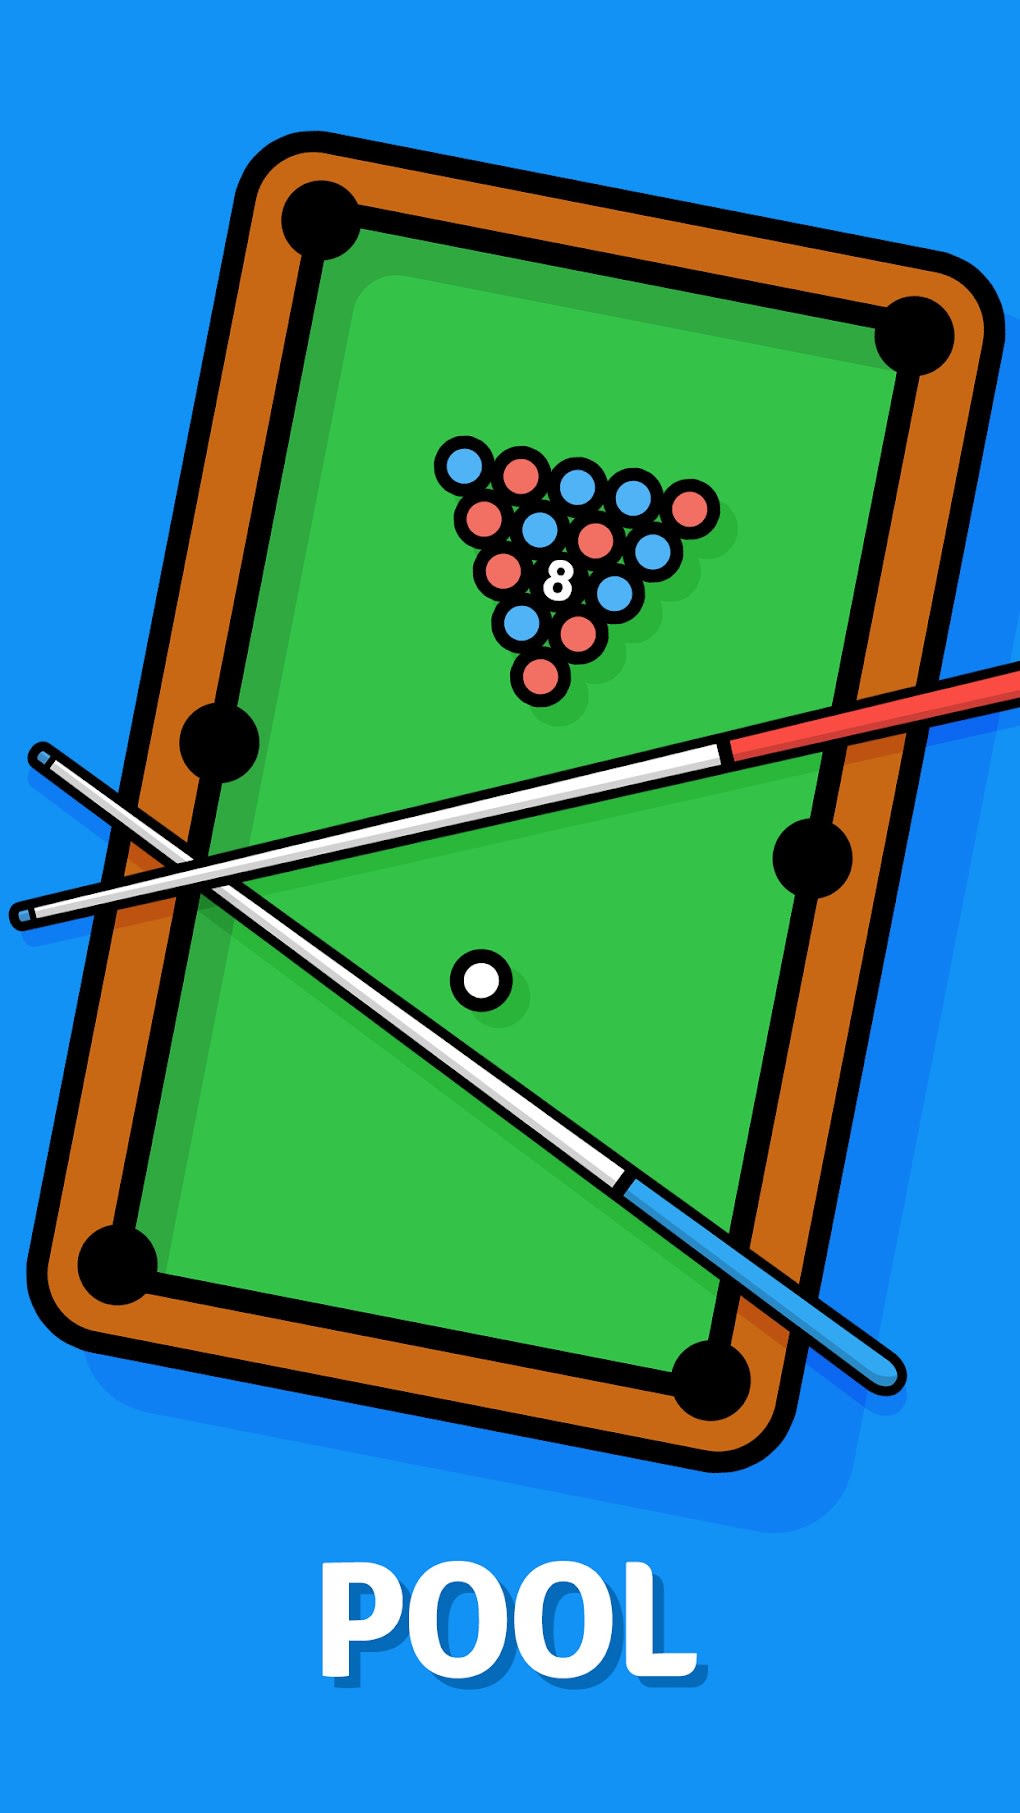 2 Player Battle APK for Android Download